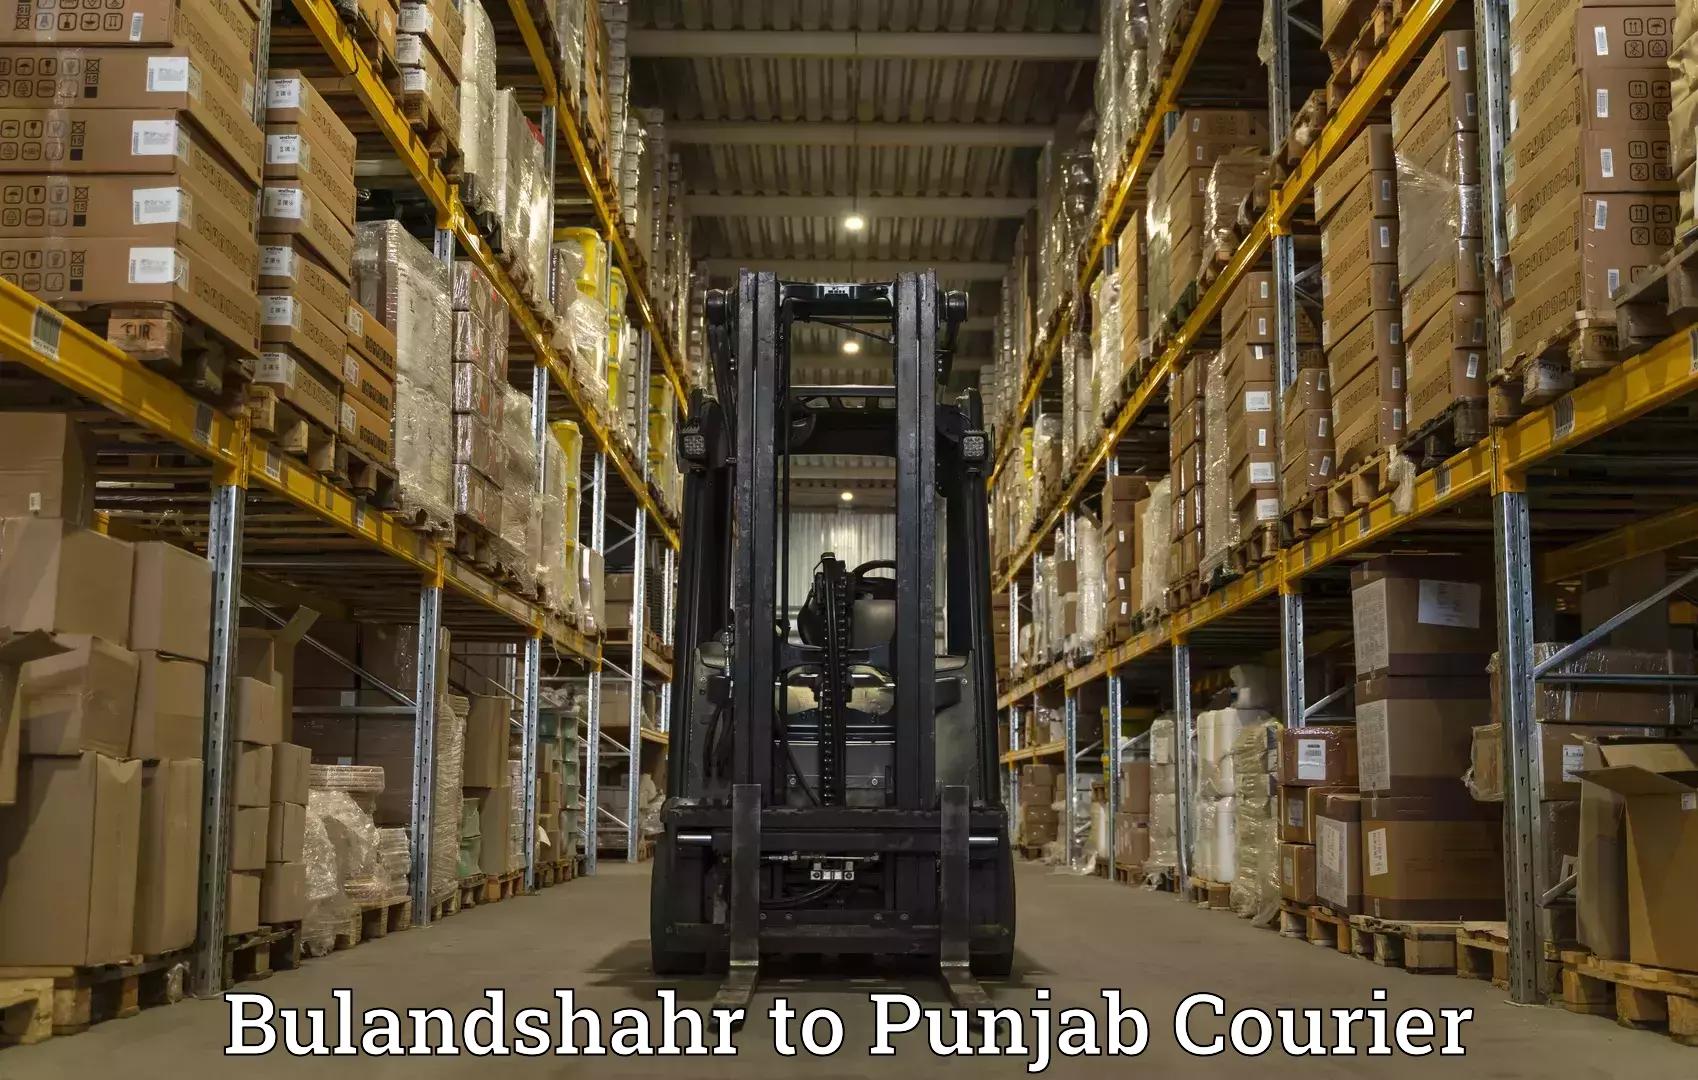 Package delivery network Bulandshahr to Zirakpur